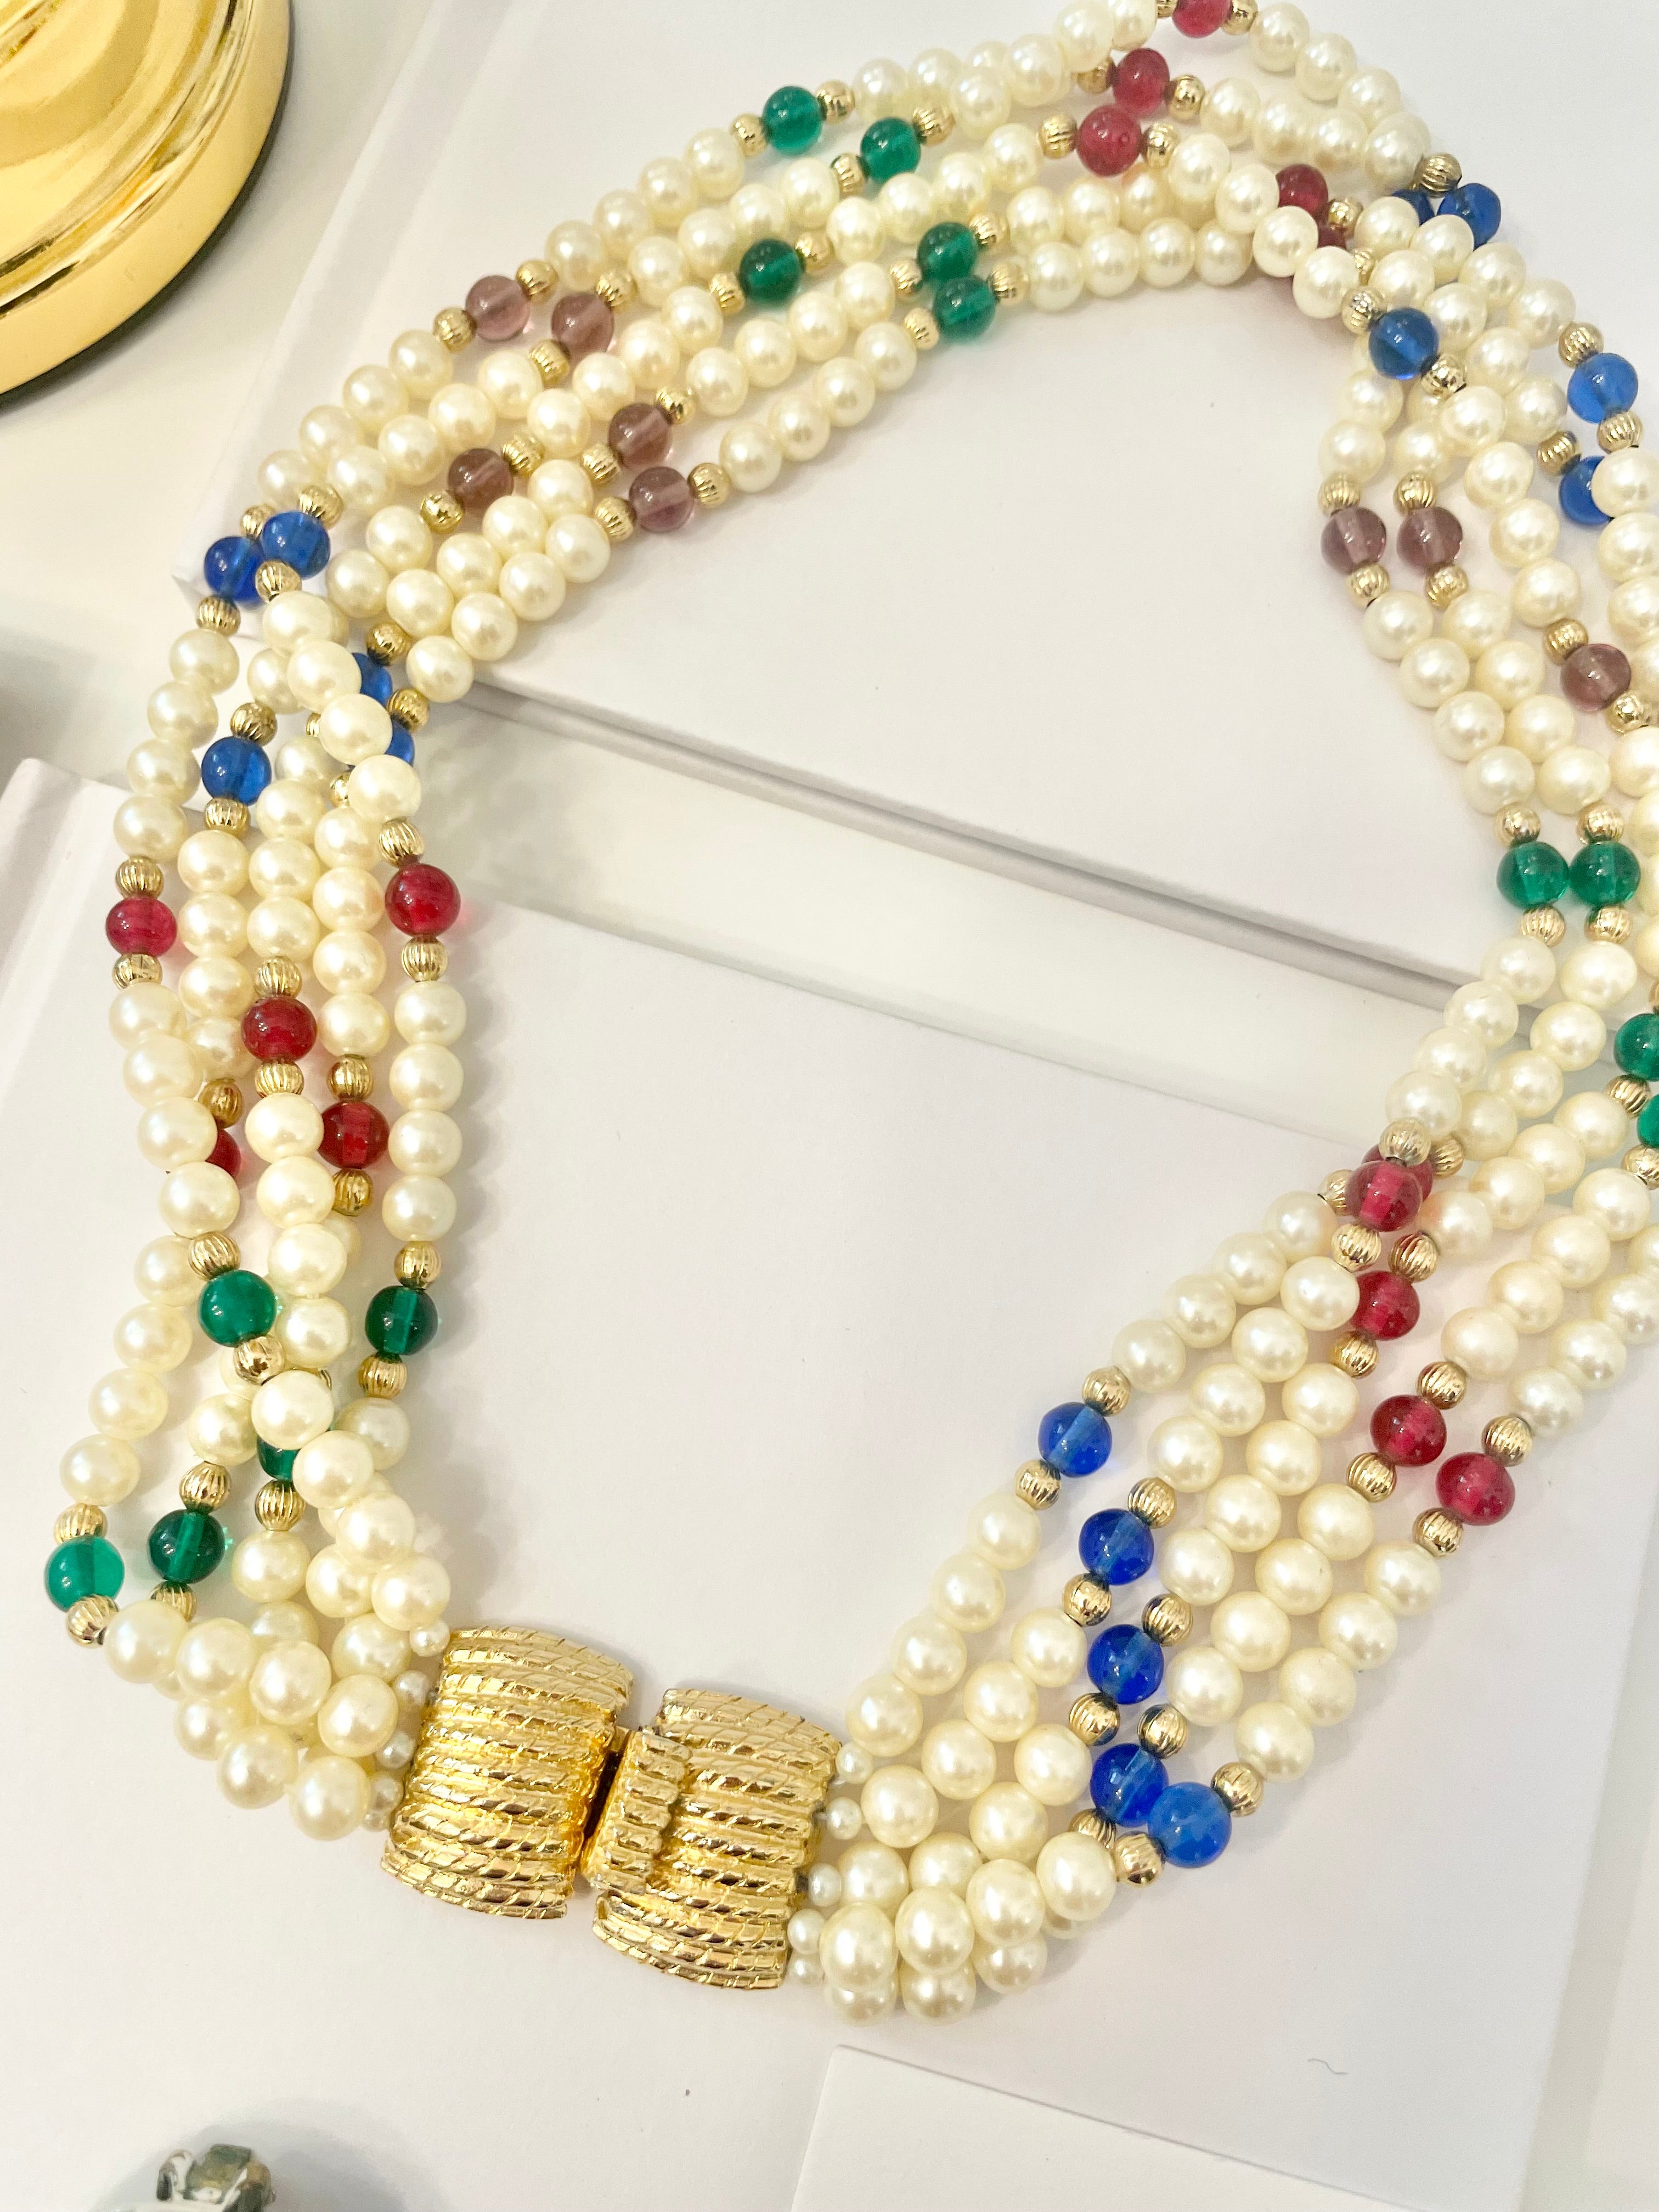 Isn't she charming... she adores anything with pearls..this 1980's super chic multi strand beaded necklace is divine!